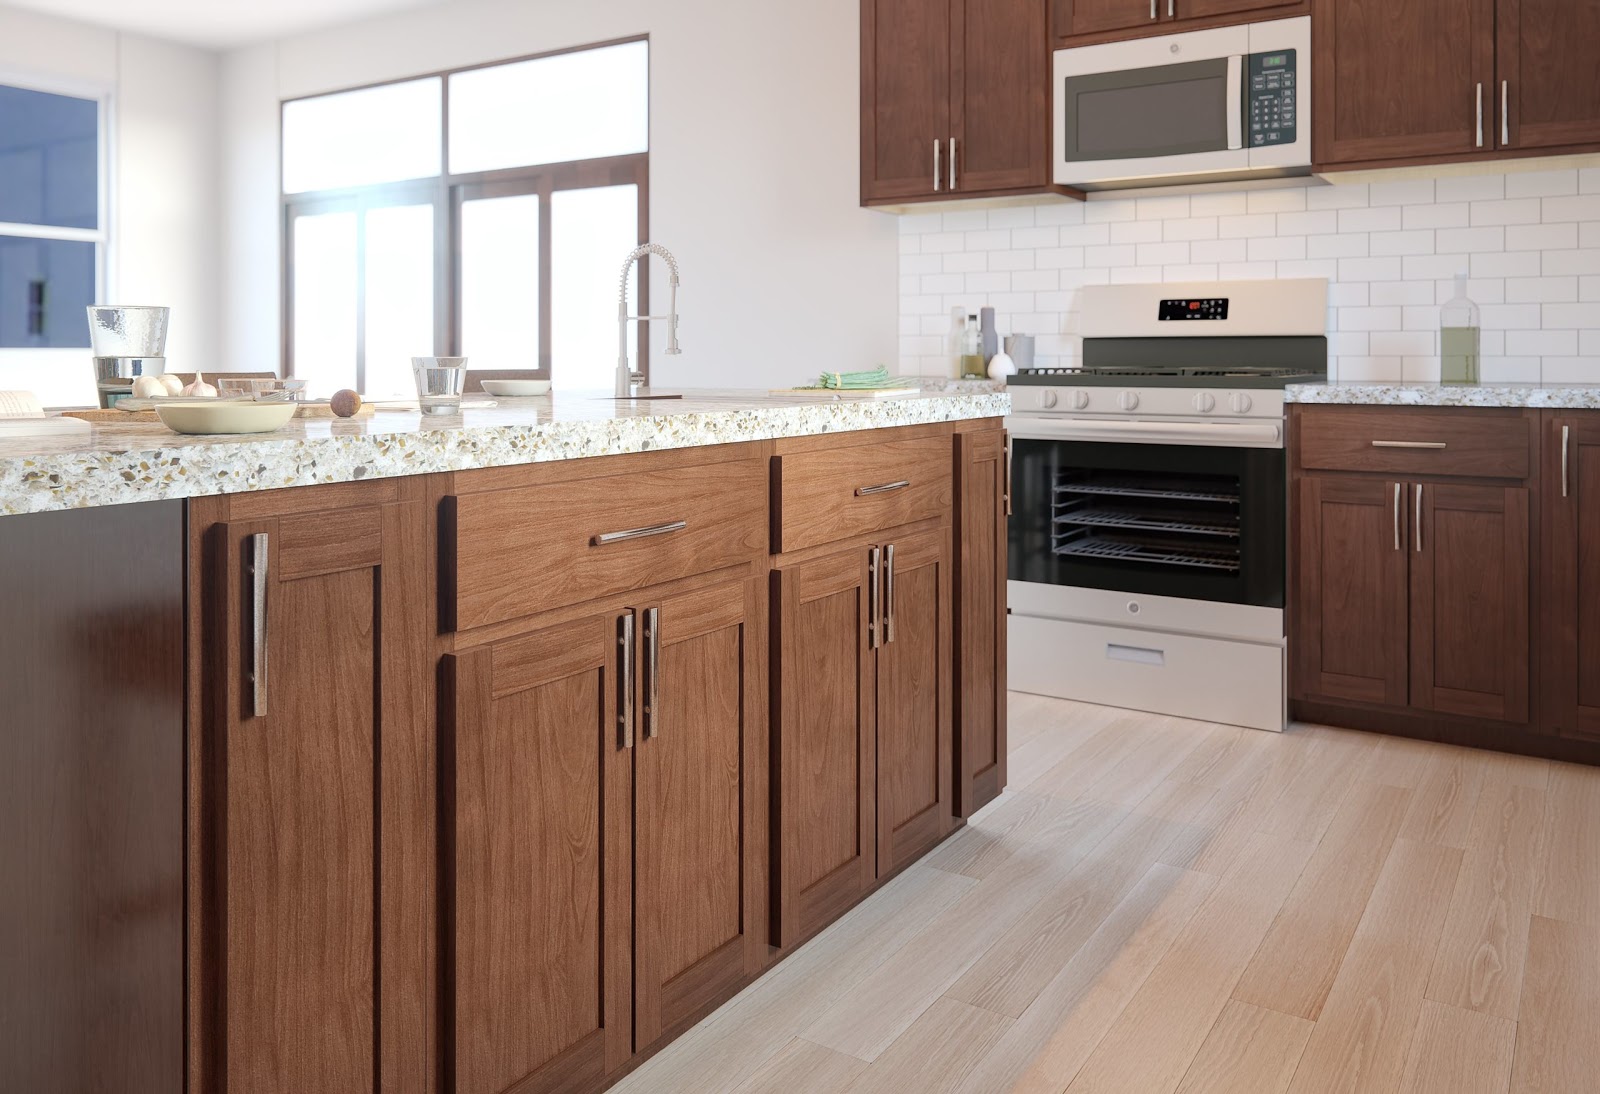 How To Modify Shaker Cabinets In A Kitchen Renovation